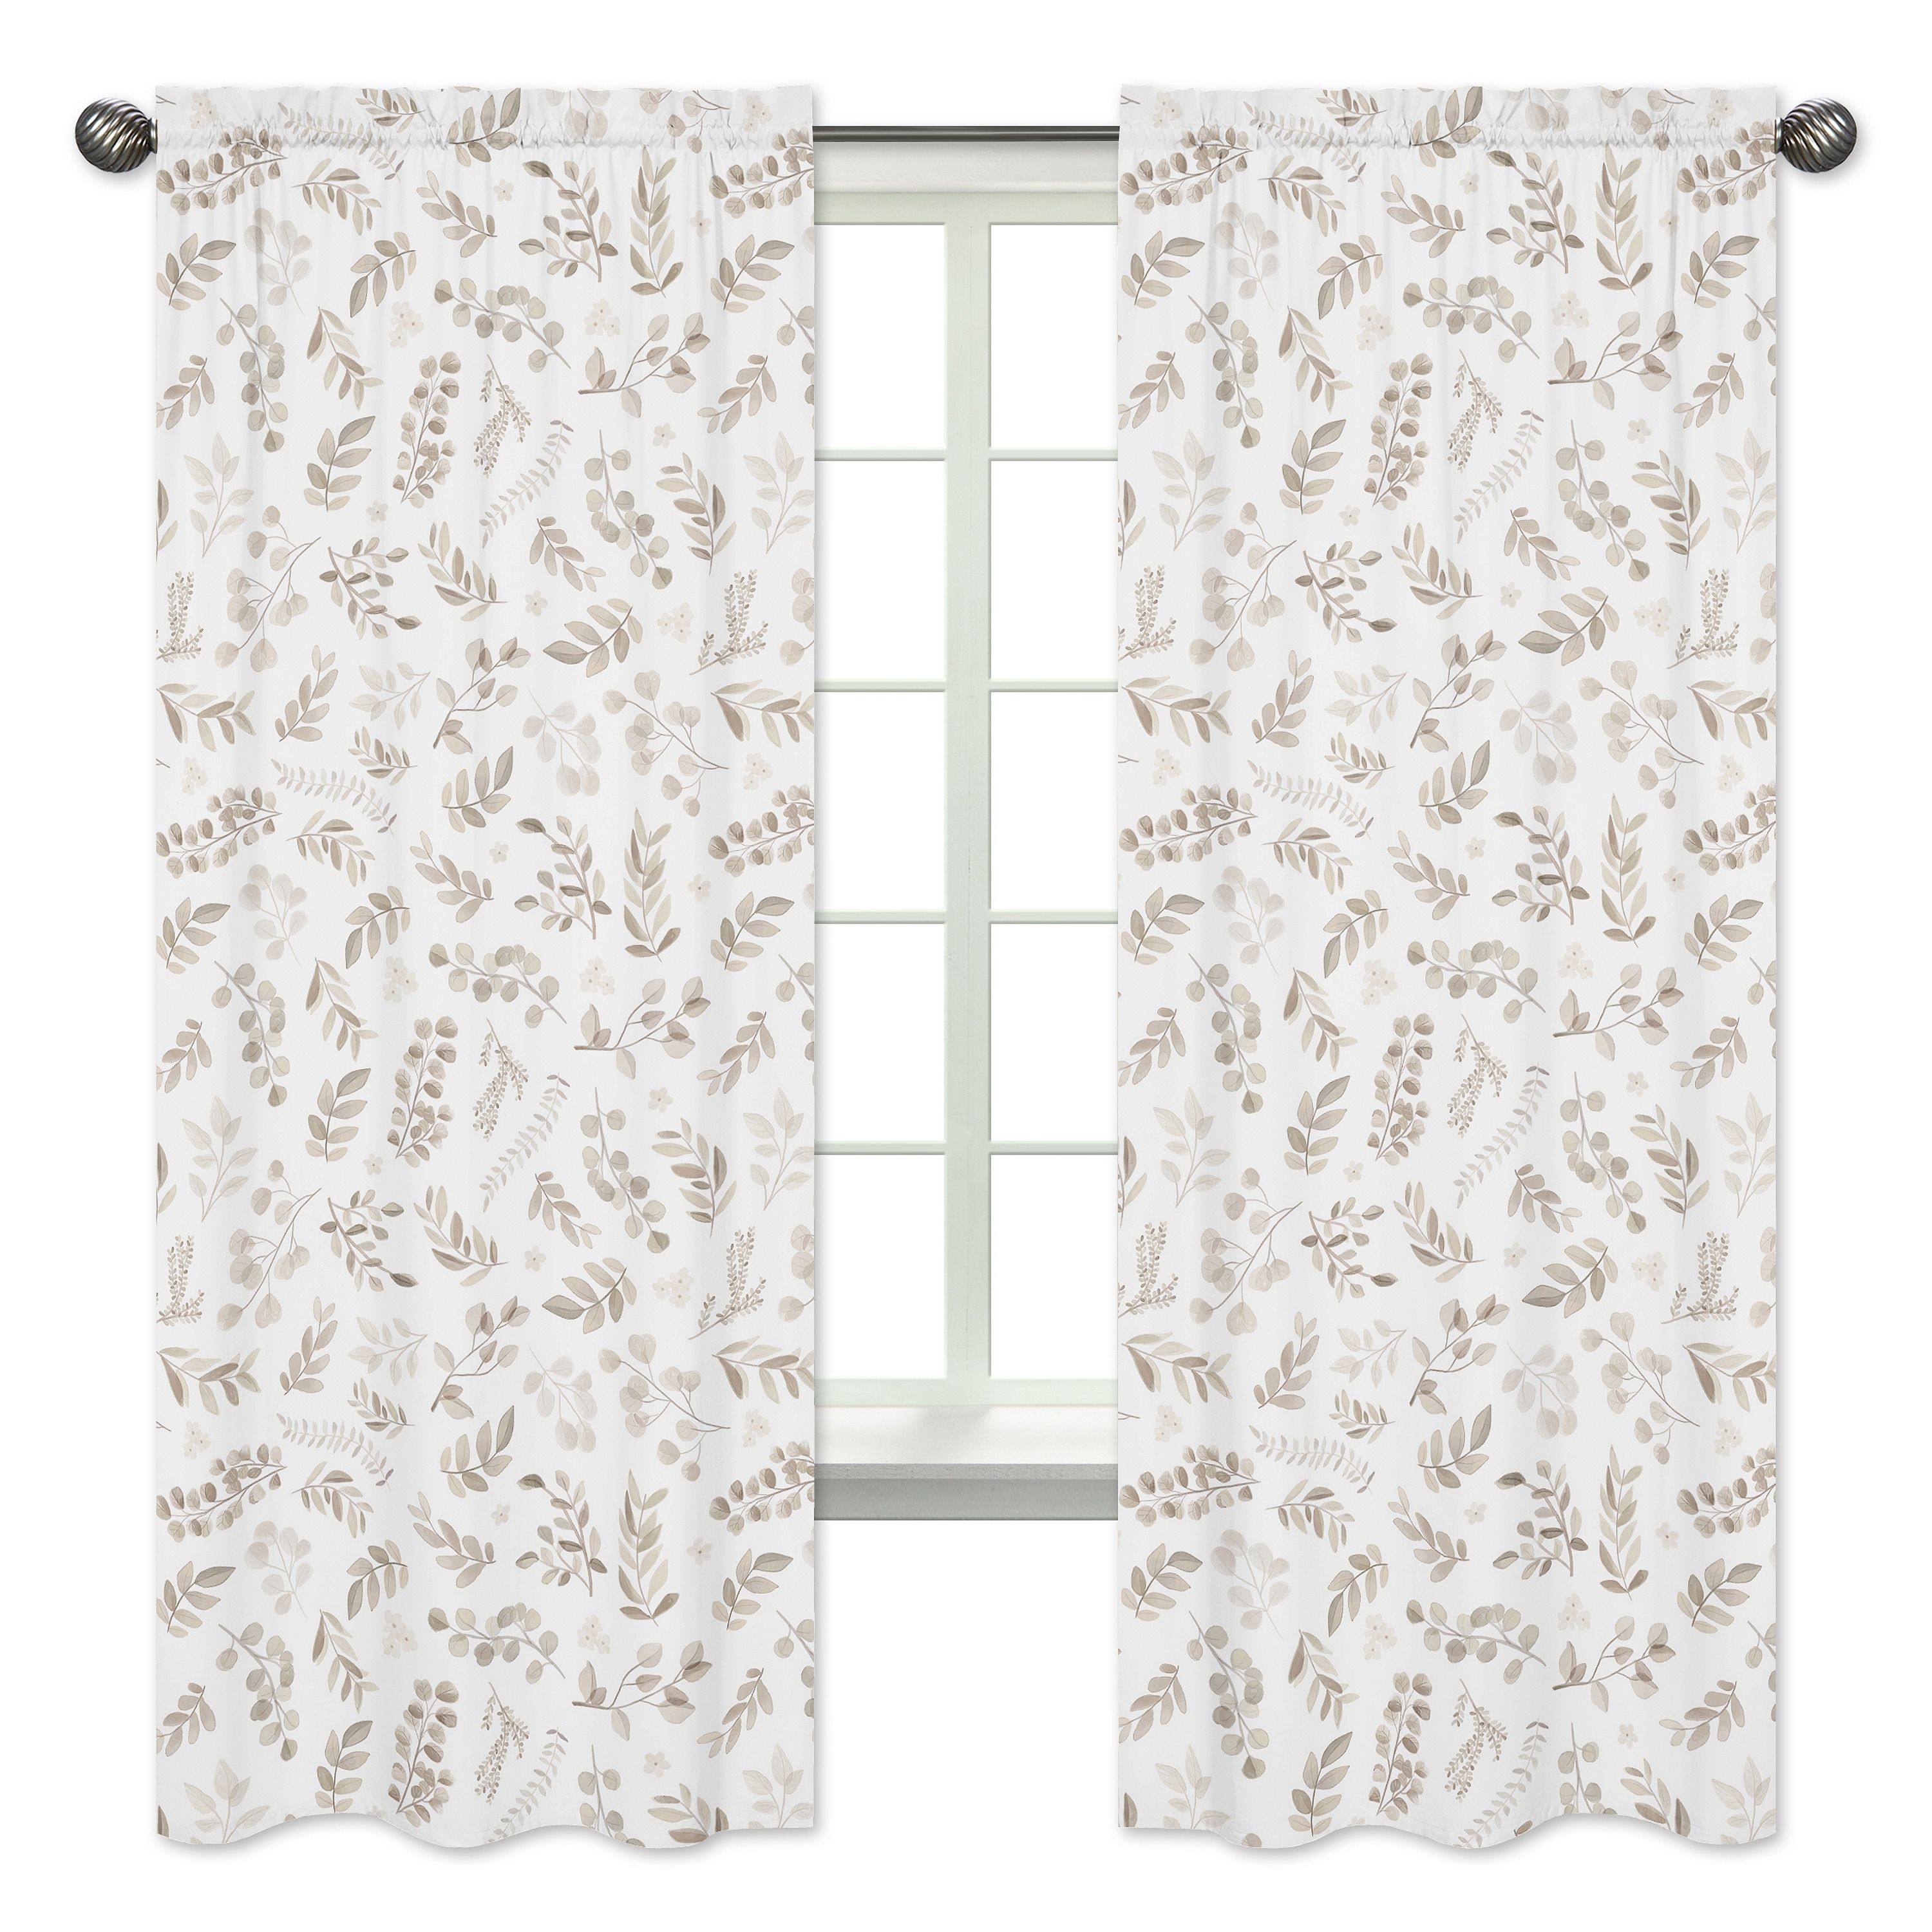 Floral Leaf 84in Window Treatment Curtain Panel Pair - Ivory Cream Beige  Taupe Gender Neutral Boho Watercolor Botanical Woodland - Overstock -  33109708